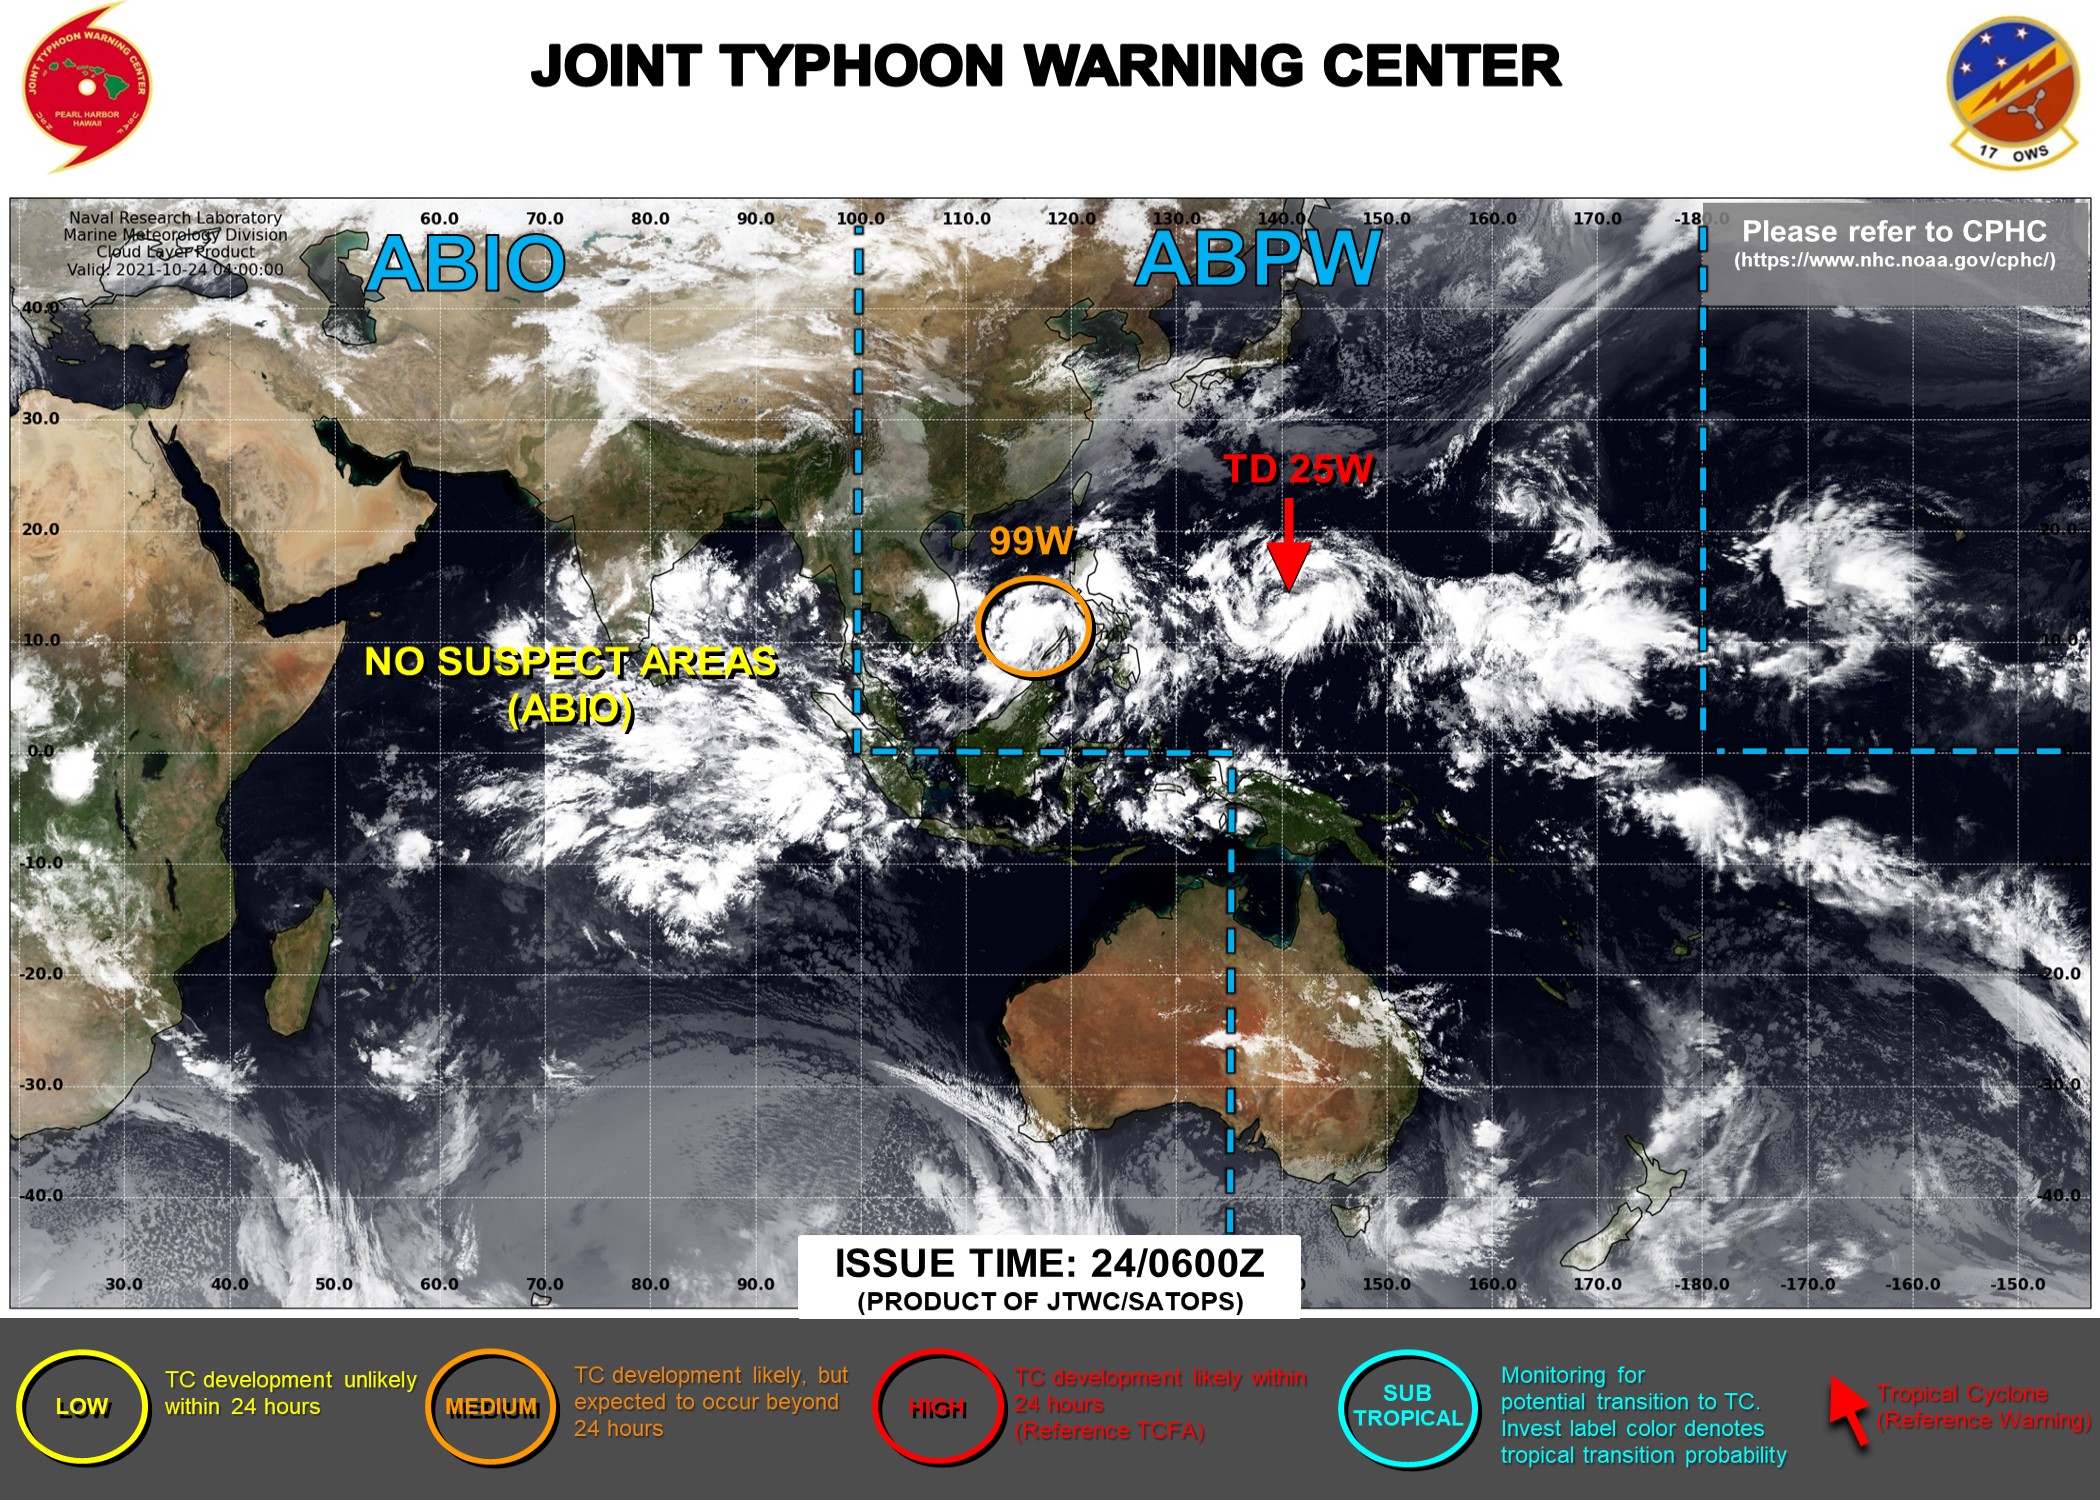 JTWC IS ISSUING 6HOURLY WARNINGS AND 3HOURLY SATELLITE BULLETINS ON TD 25W. INVEST 99W HAS BEEN UP-GRADED TO MEDIUM AT 24/06UTC.